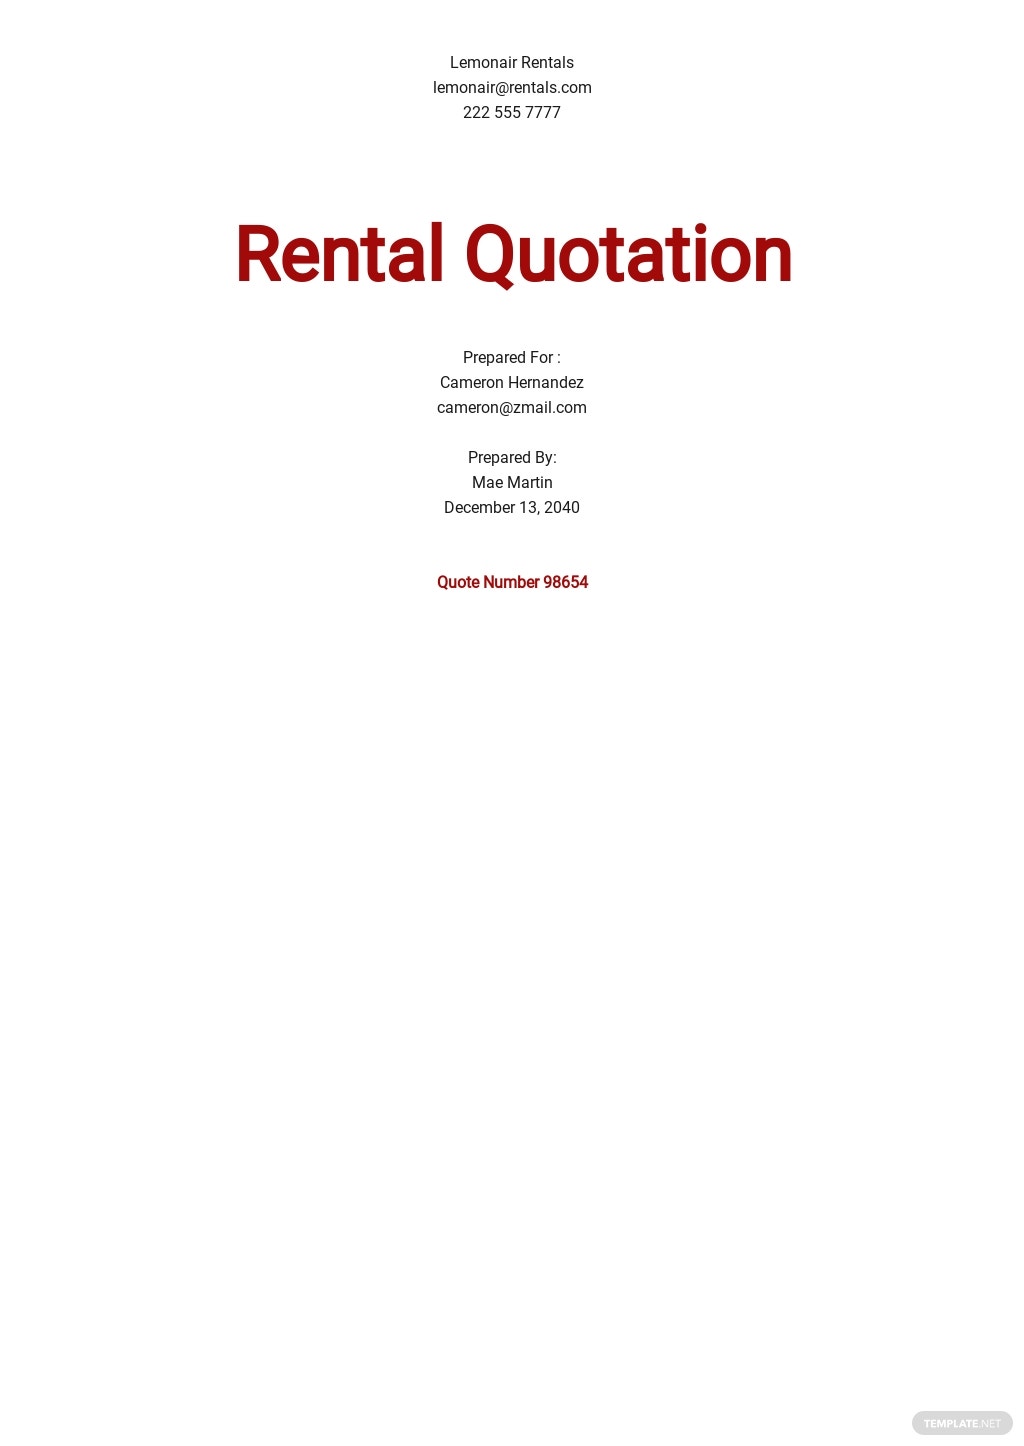 free rental quotation format template